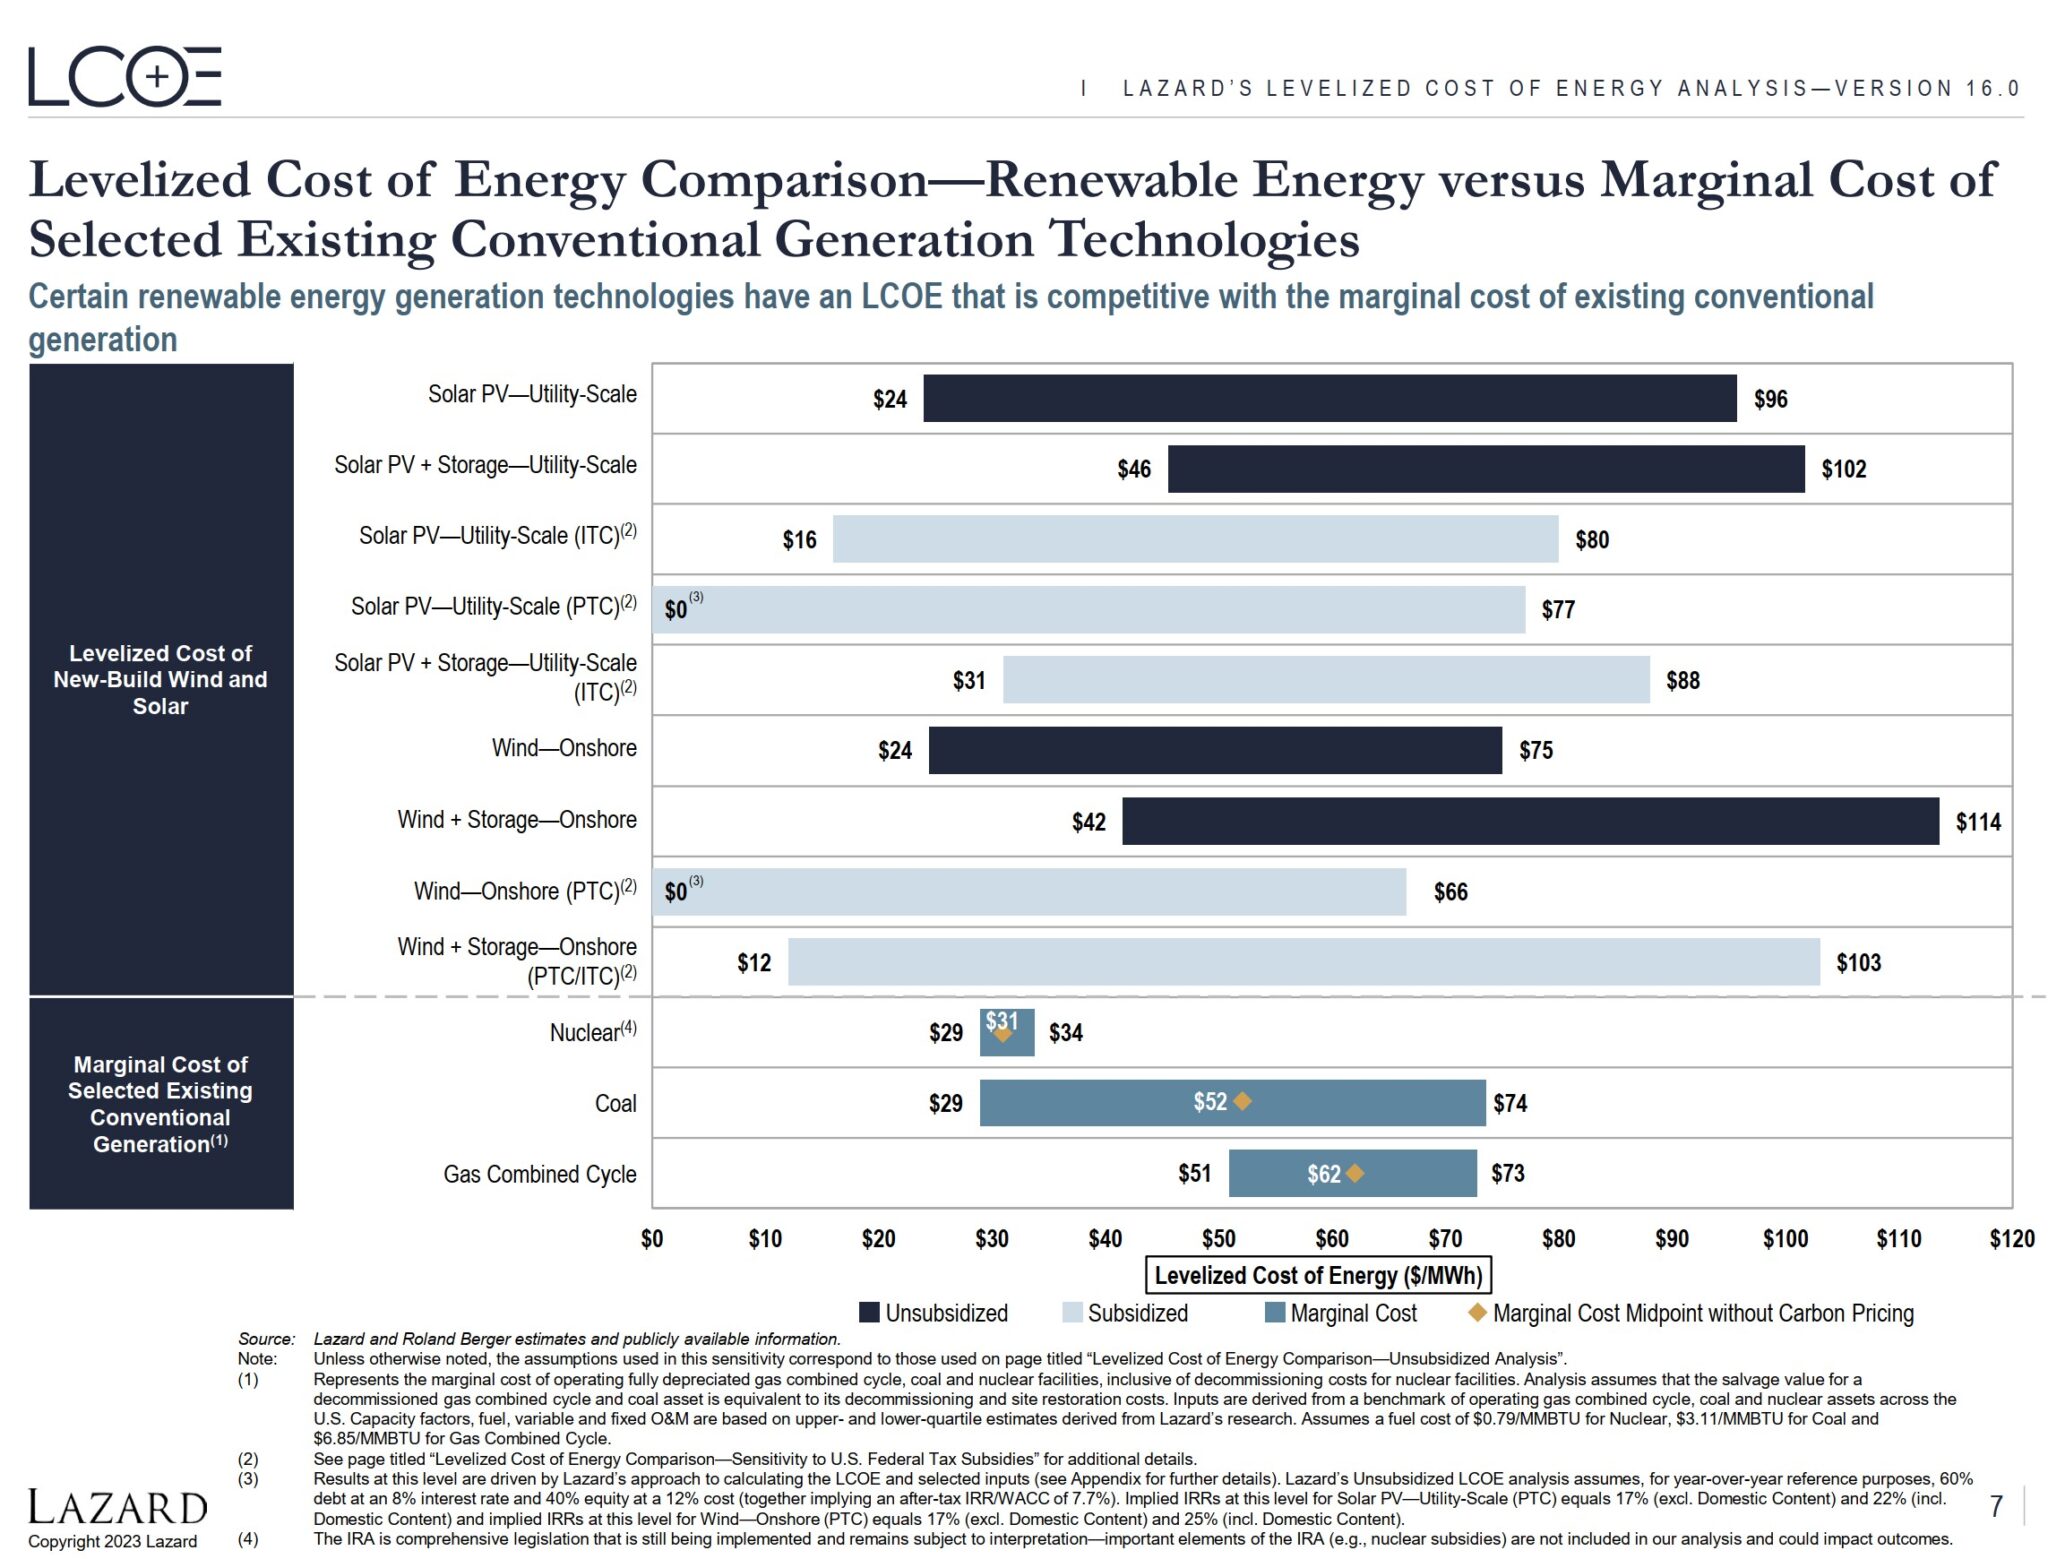 Lazard LCOE report sees “zero cost” solar and wind due to IRA pv